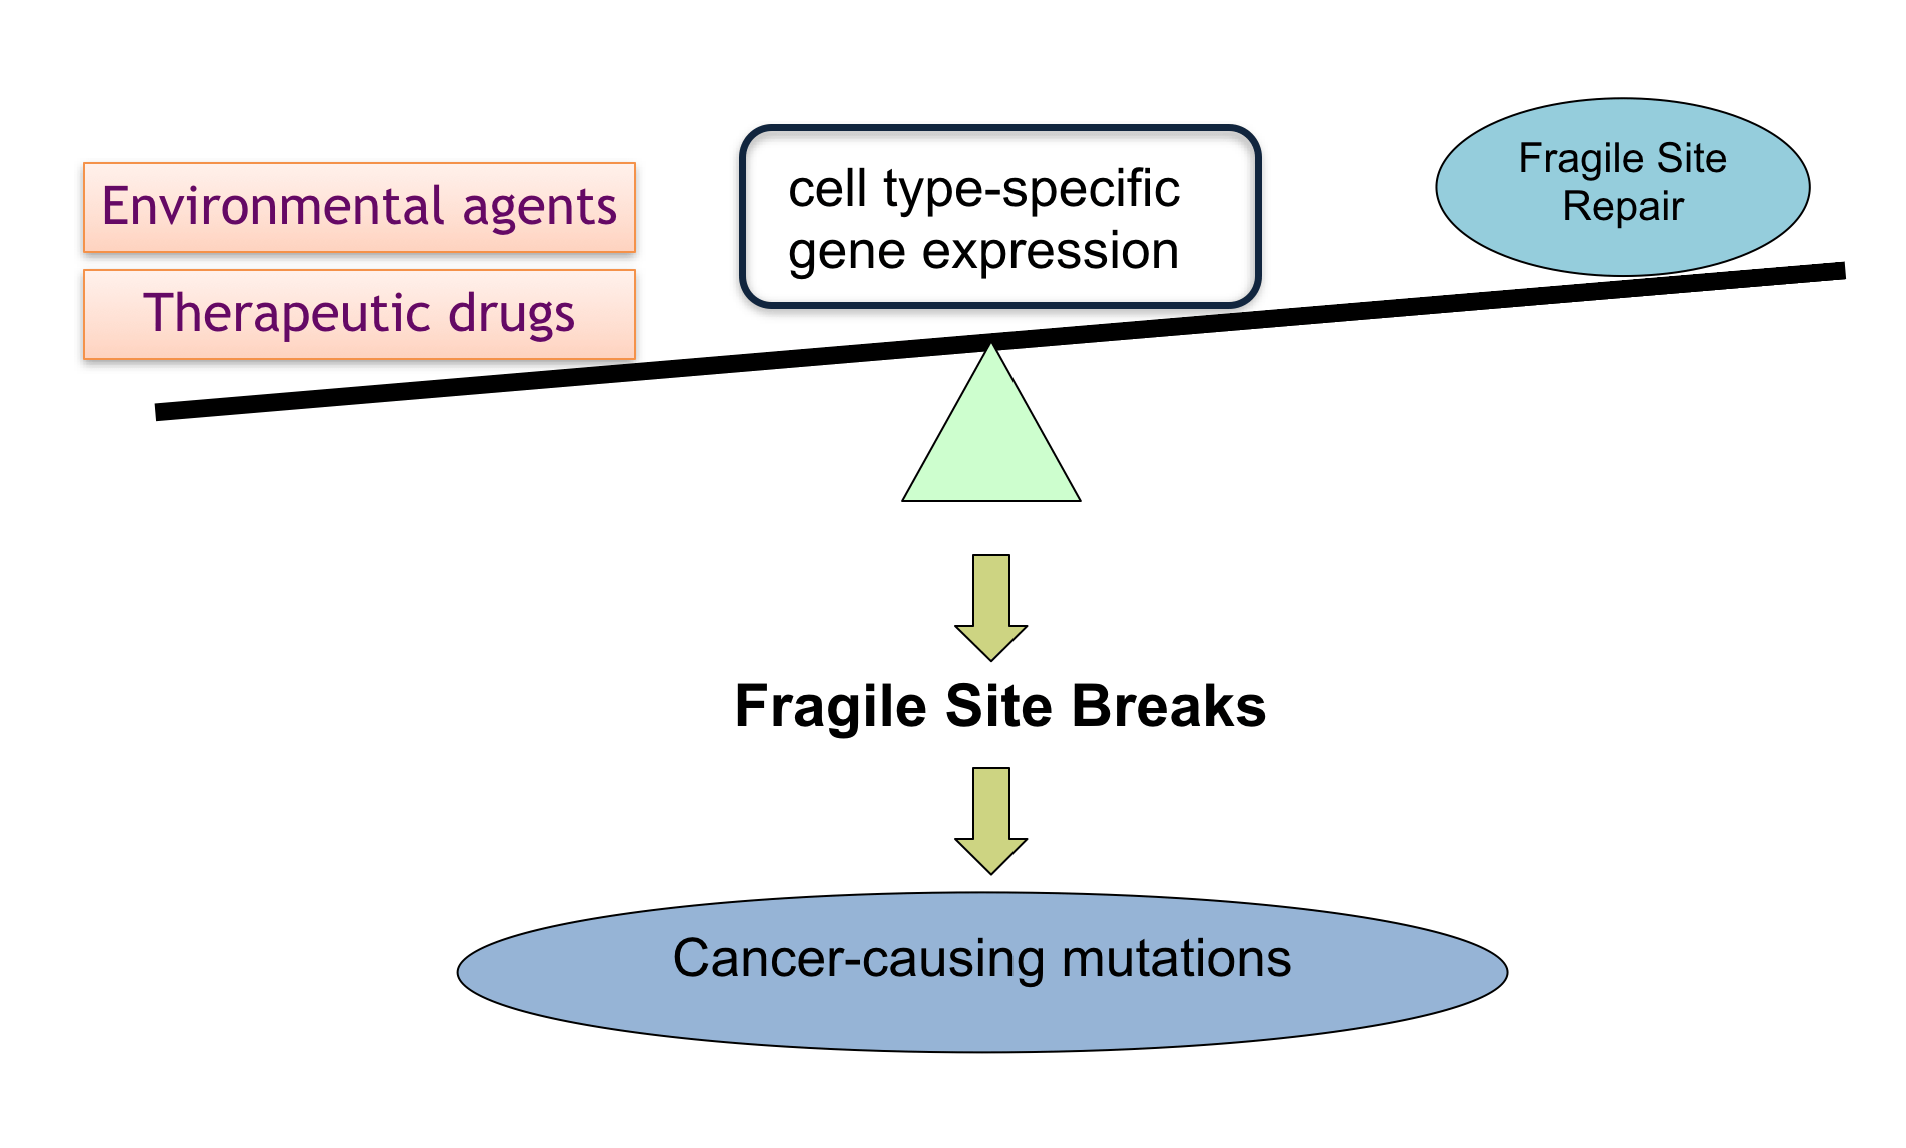 Diagram showing the balance between the impact of environmental agents and therapeutic drugs abd fragile site repair with cell type-specific gene expression in the center. All of this contributing to the fragile site breaks and potential cancer-causing mutations.